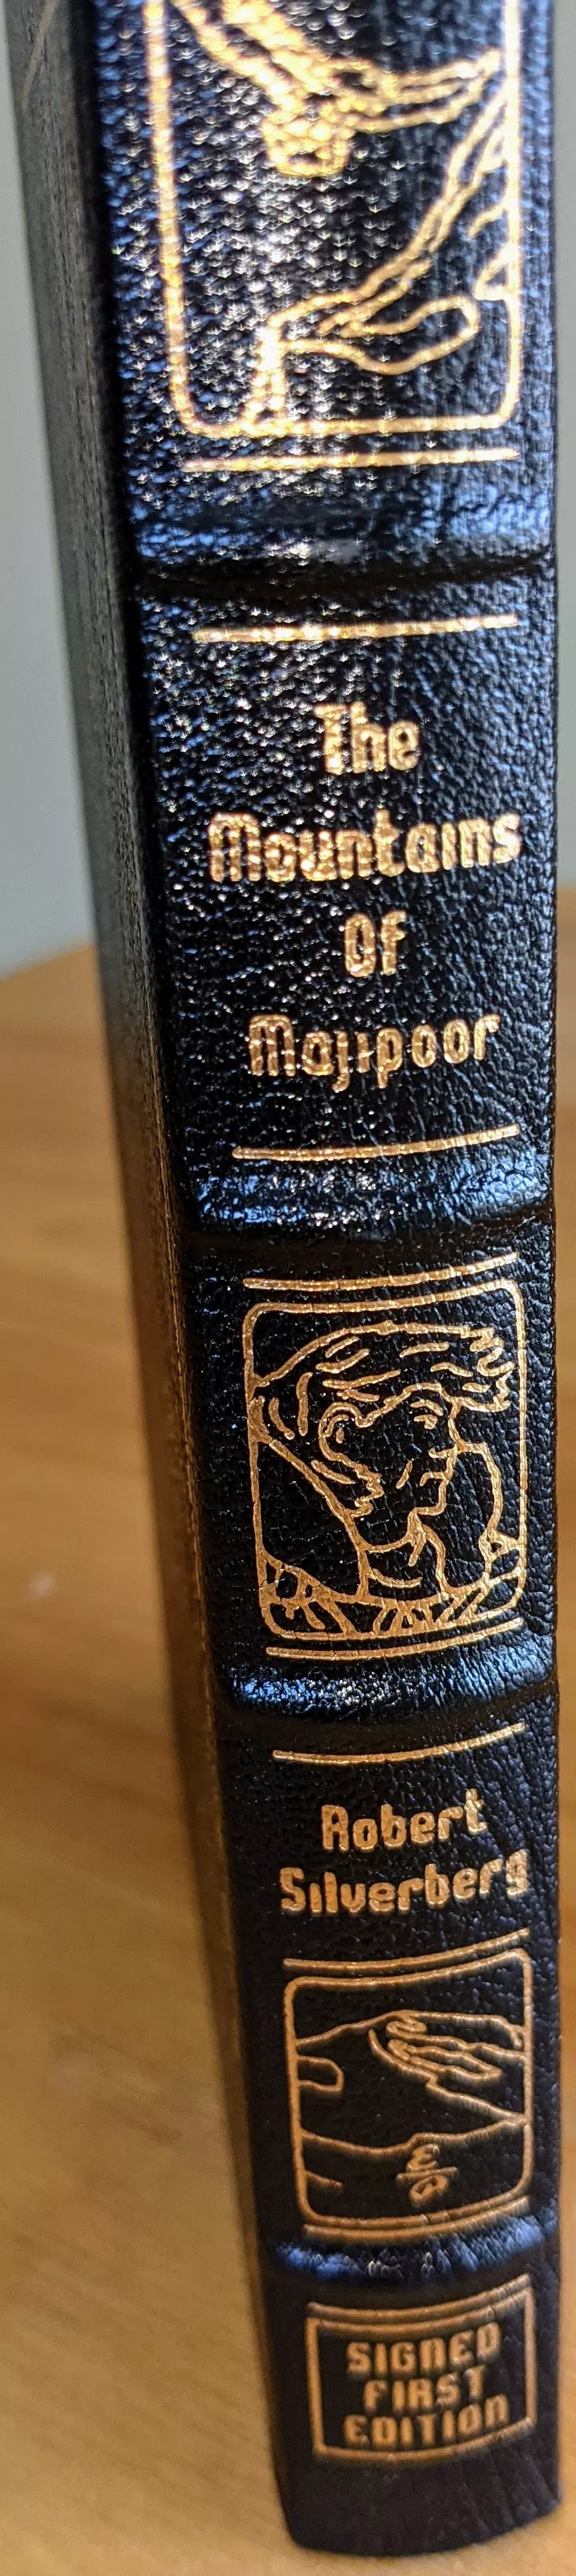 Stunning Black Leather Bound hardback book with hubbed spine, cover artwork in 22kt gold, printed on archival paper with gold gilded edges, smyth sewing & concealed muslin joints
	  - original artwork by Ron Miller